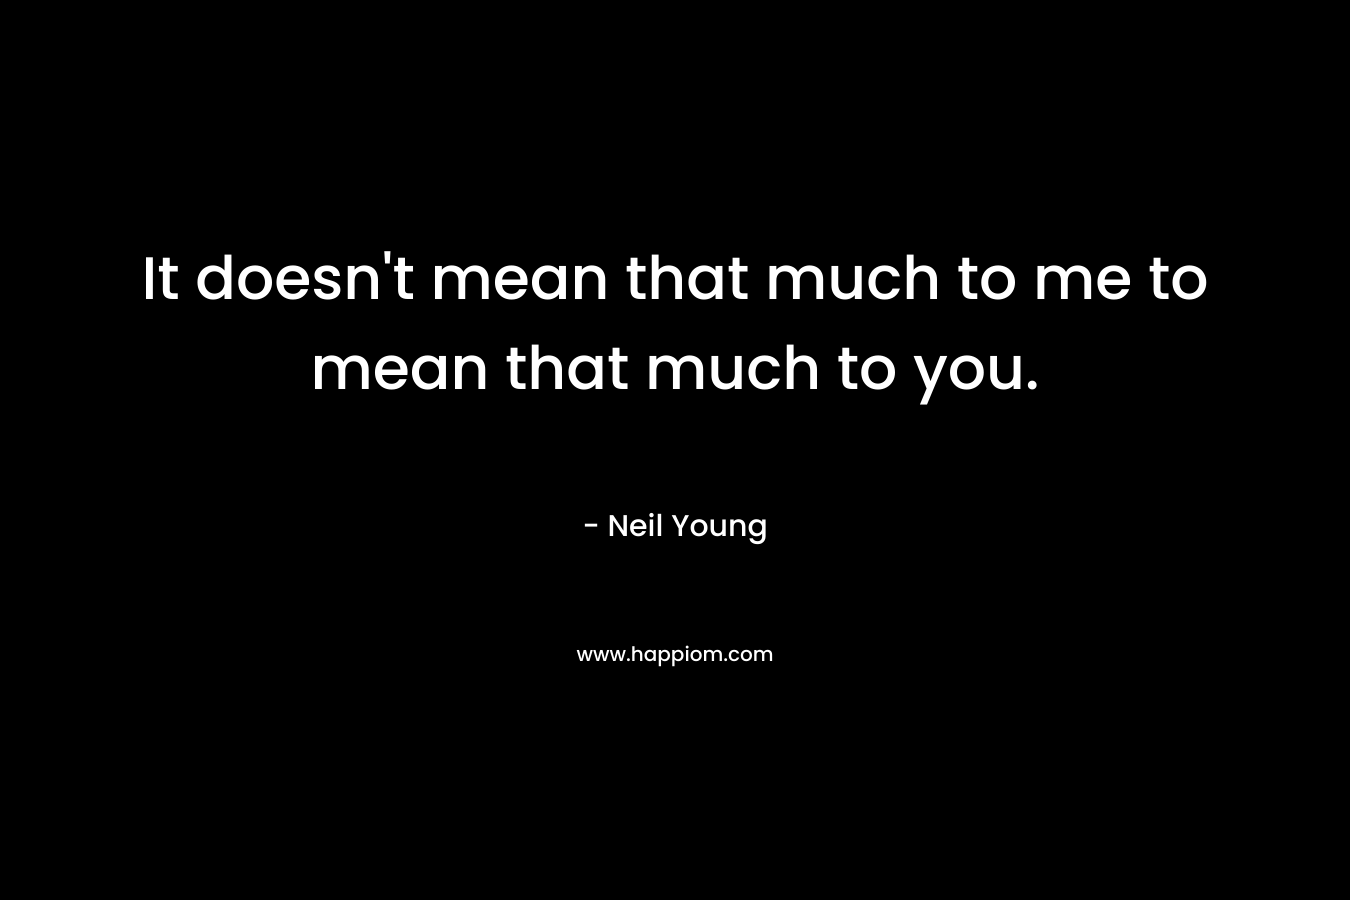 It doesn't mean that much to me to mean that much to you.